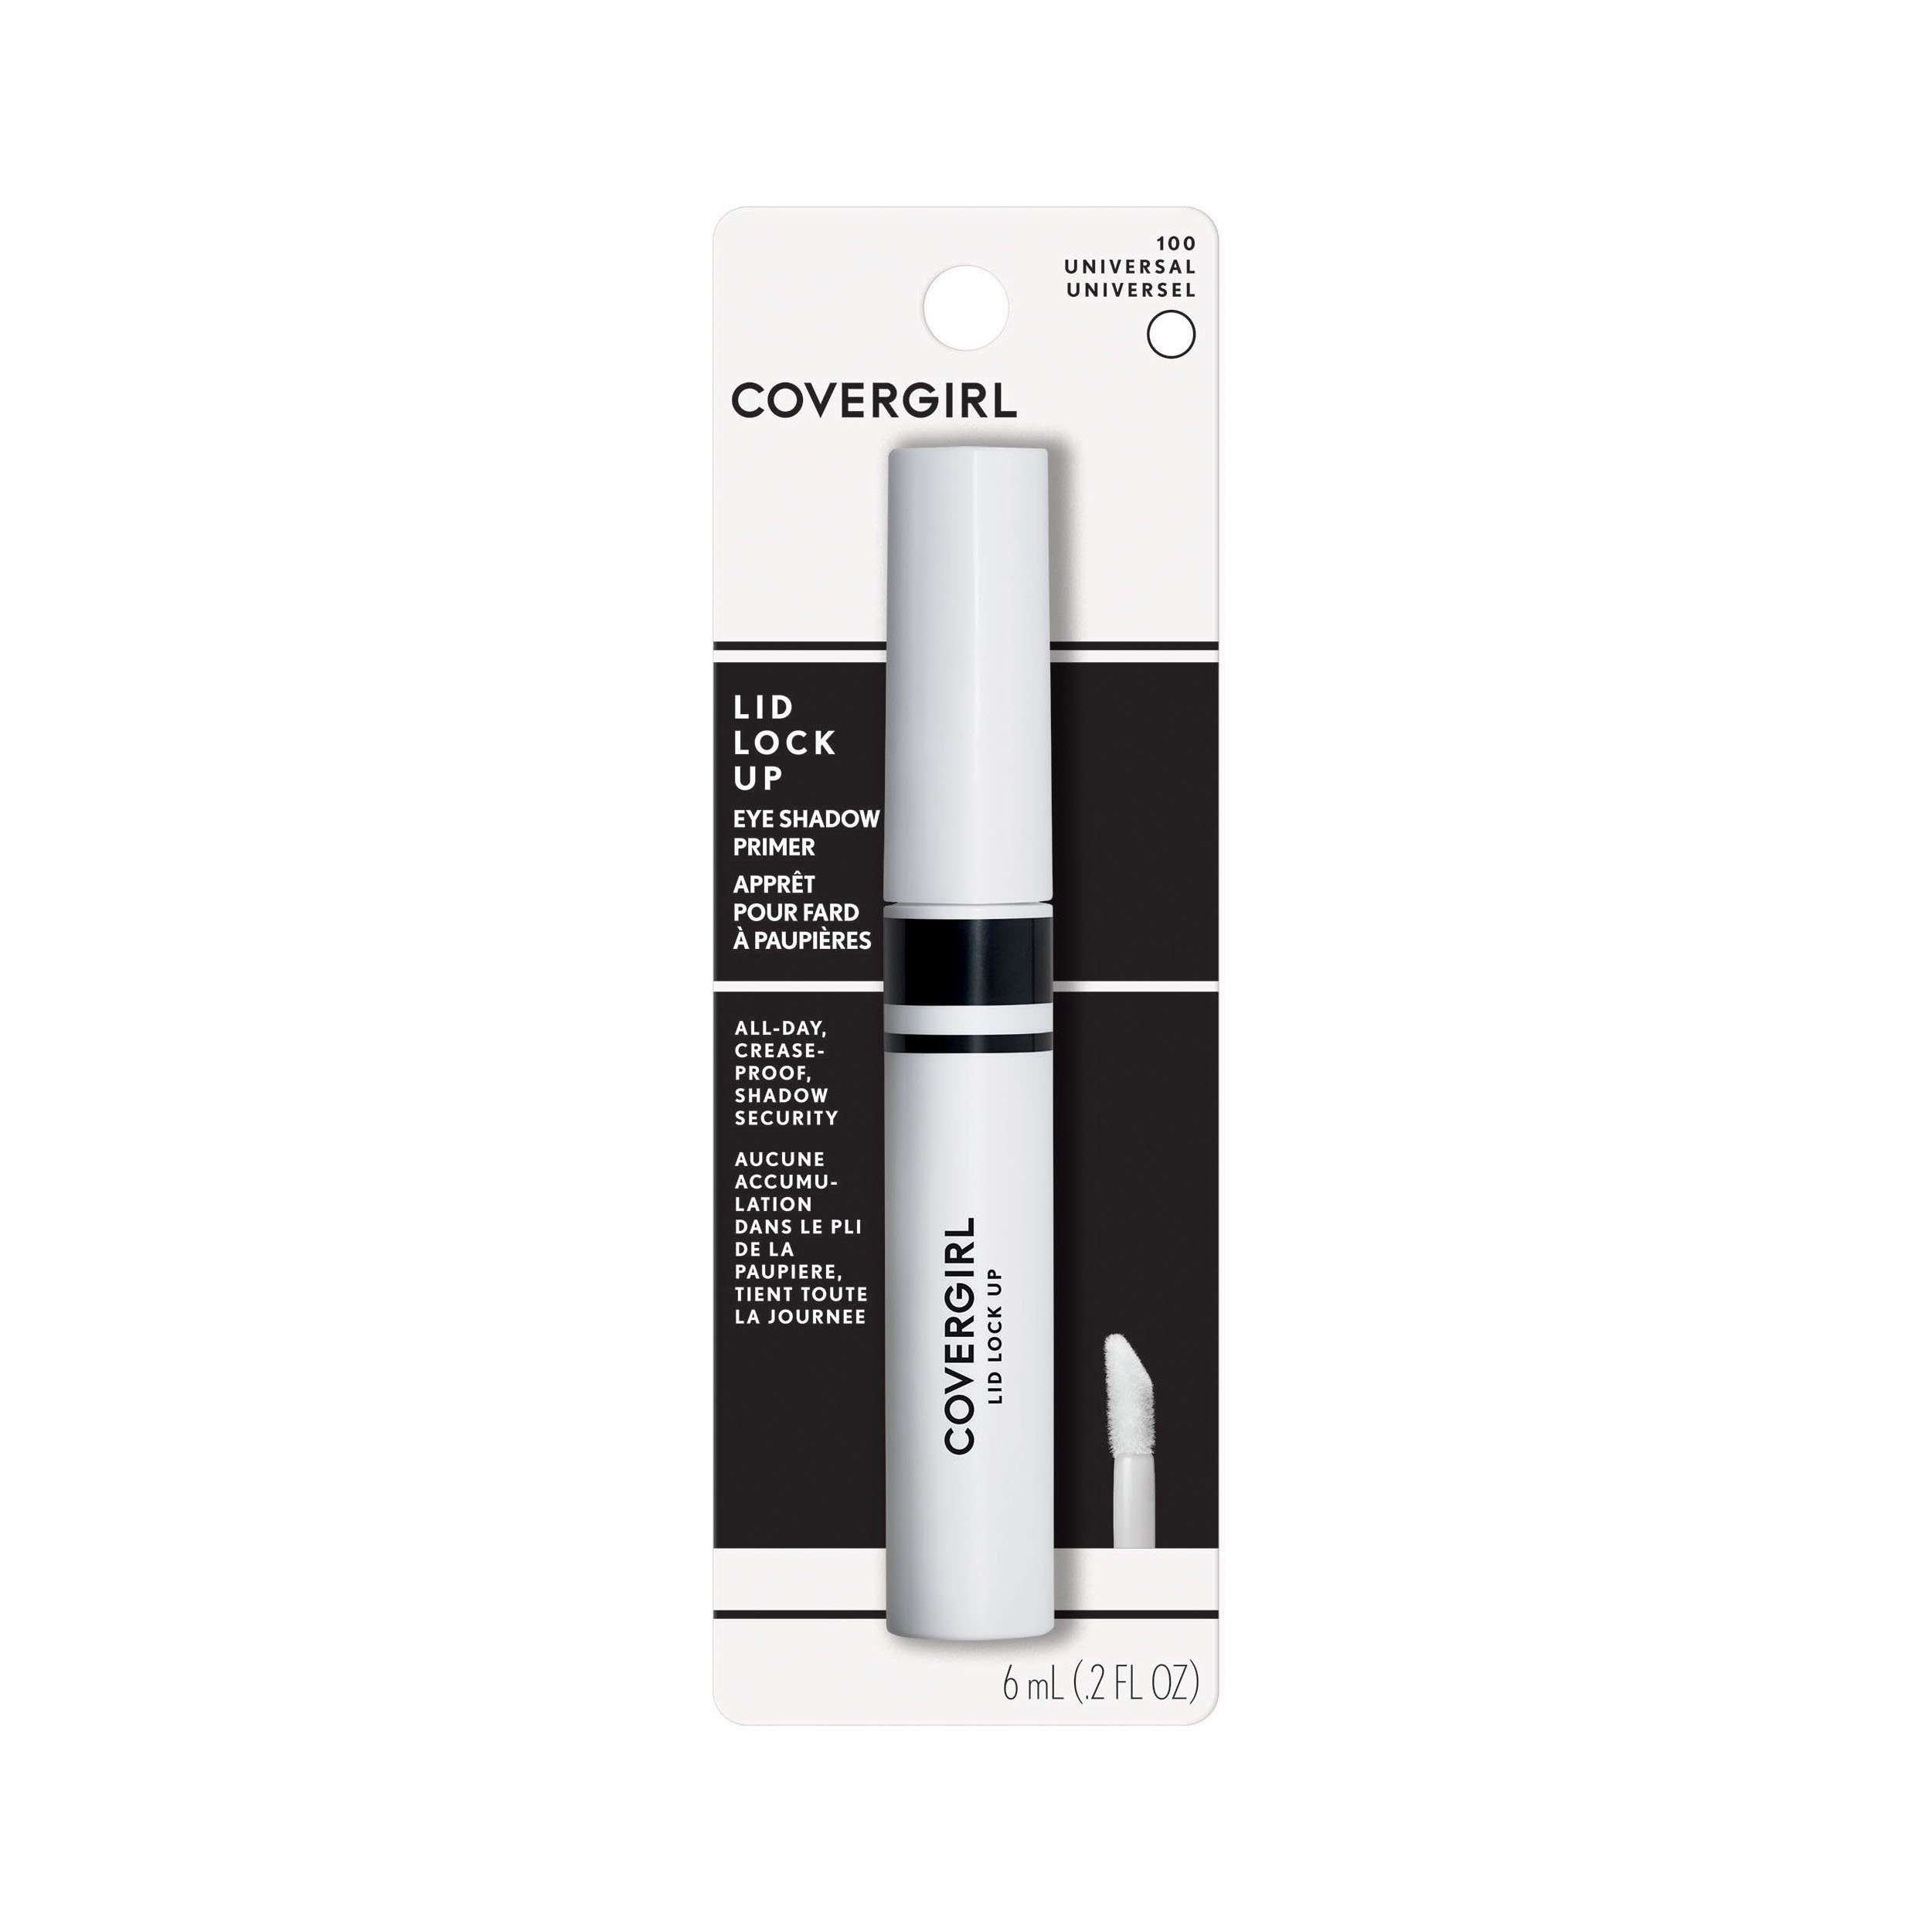 COVERGIRL Lid Lock Up Eyeshadow Primer, Clear, All-Day, Dries Quickly, .06 Pound, Crease-Proof, Shadow Security, Maximizes the Wear and Intensity of Shadow, Preps Lids for All-Day Wear